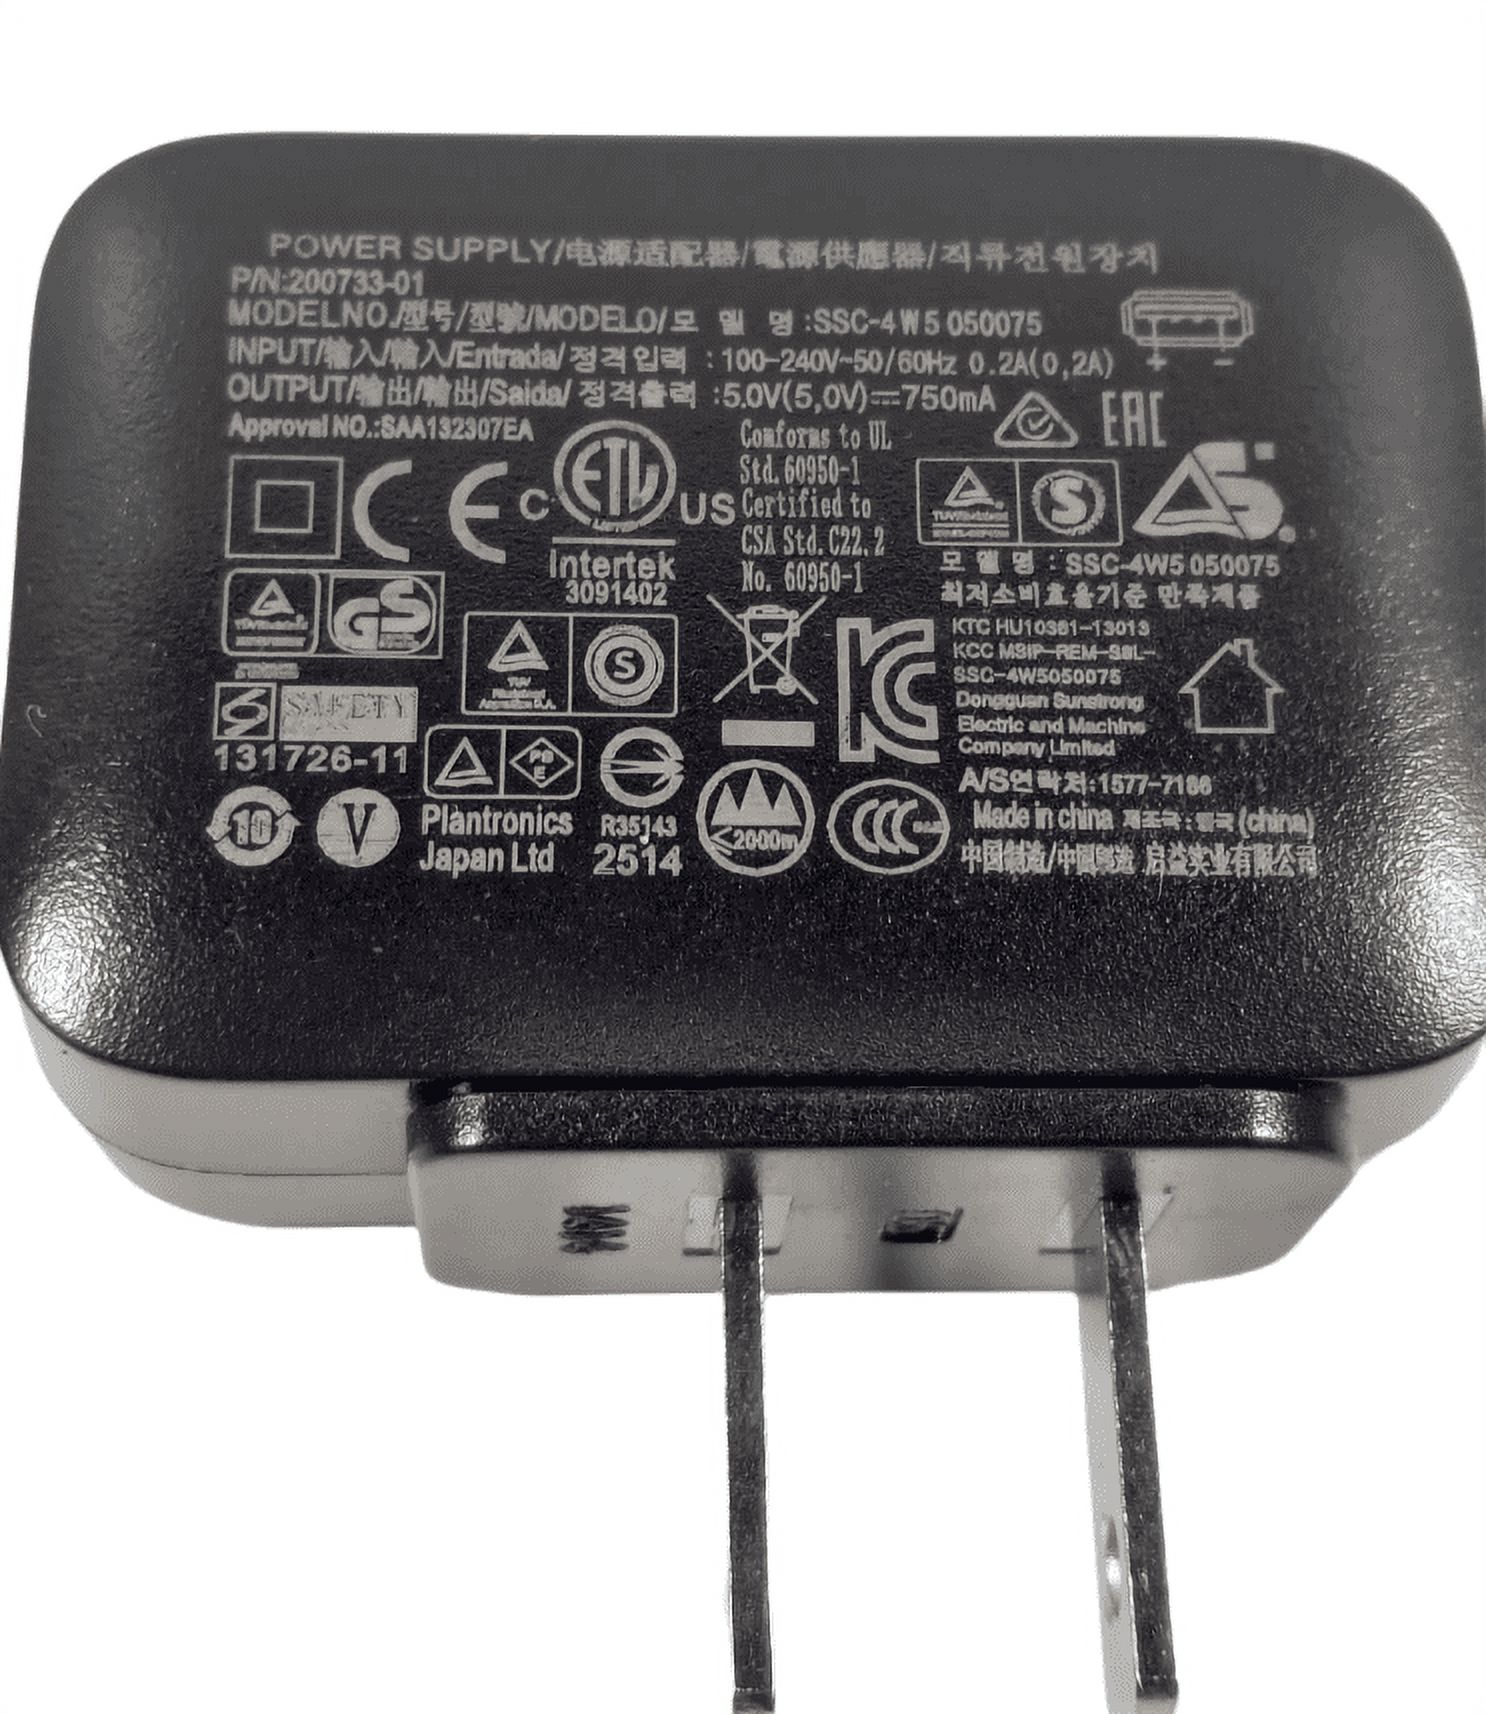 Plantronics SSC-4W5 050075 5.0V 750mA AC Power Adapter Charger 200733-01 - image 5 of 5